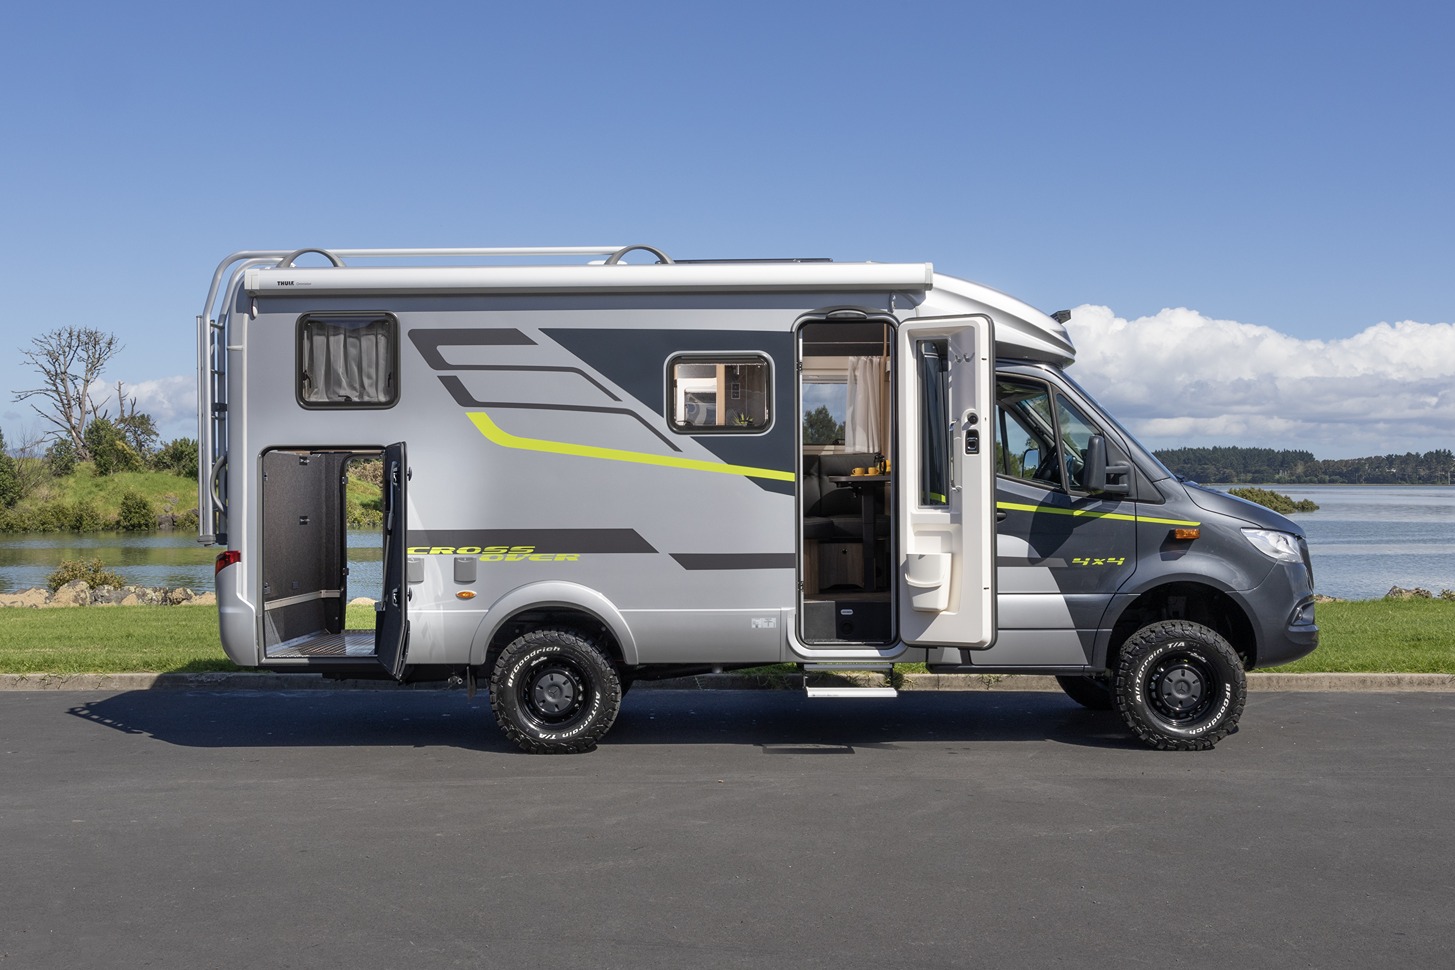 All-terrain tyres will take you where other RV owners fear to tread